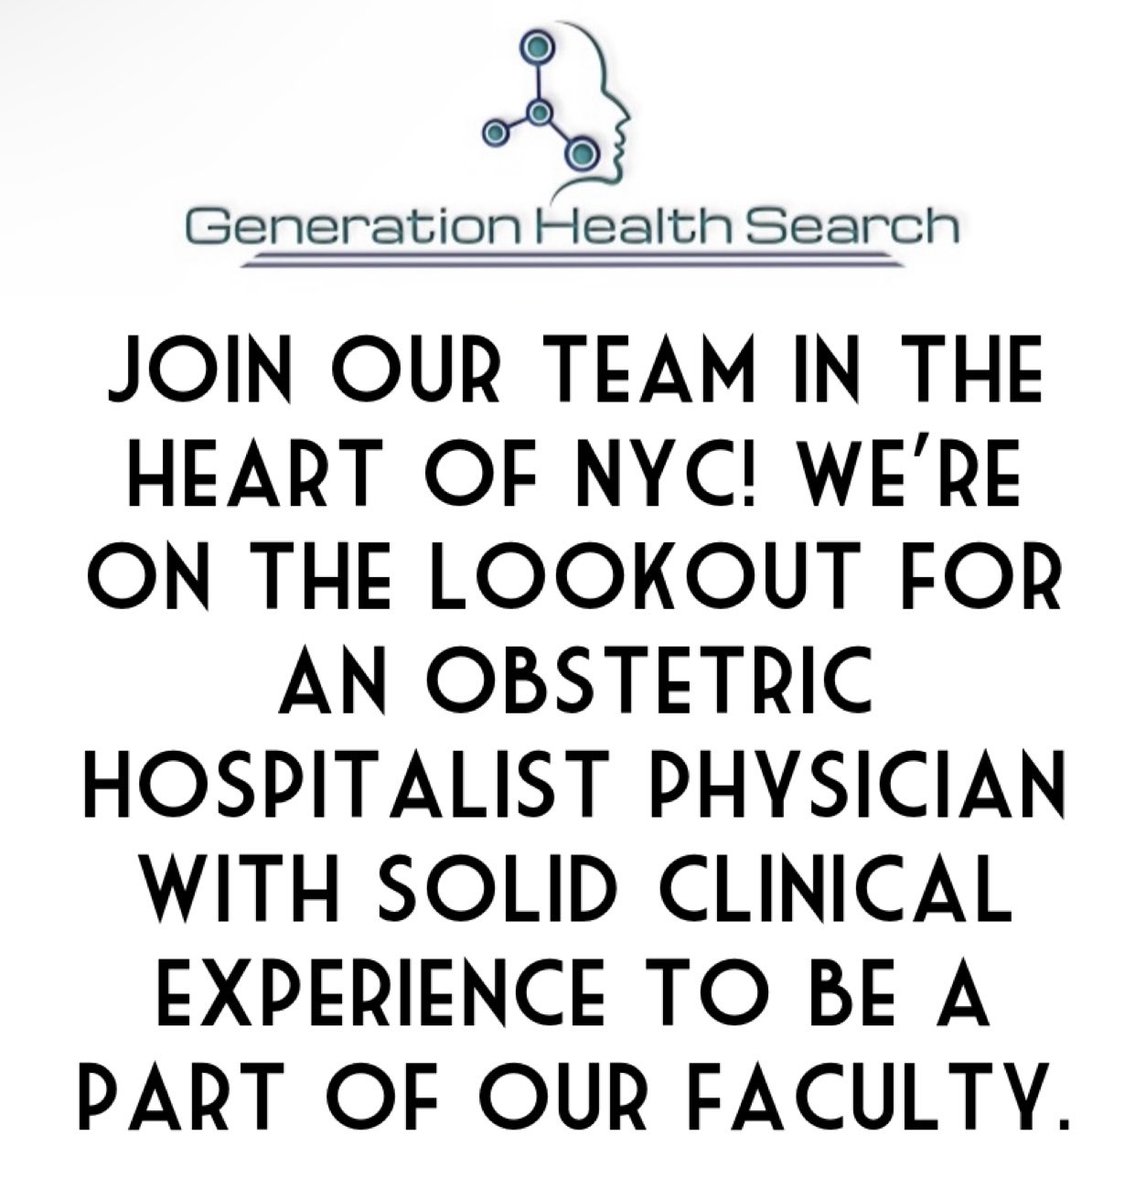 The Dept. of Obstetrics & Gynecology seeks a full-time Obstetric Hospitalist Physician. 🩺 Join us in delivering exceptional care! #OBGYN #Hospitalist #PhysicianJob 
Position: Obstetric Hospitalist Physician
📍 Location: Bronx County, NYC
Salary:$305,000-425,000
#GenerationHealth